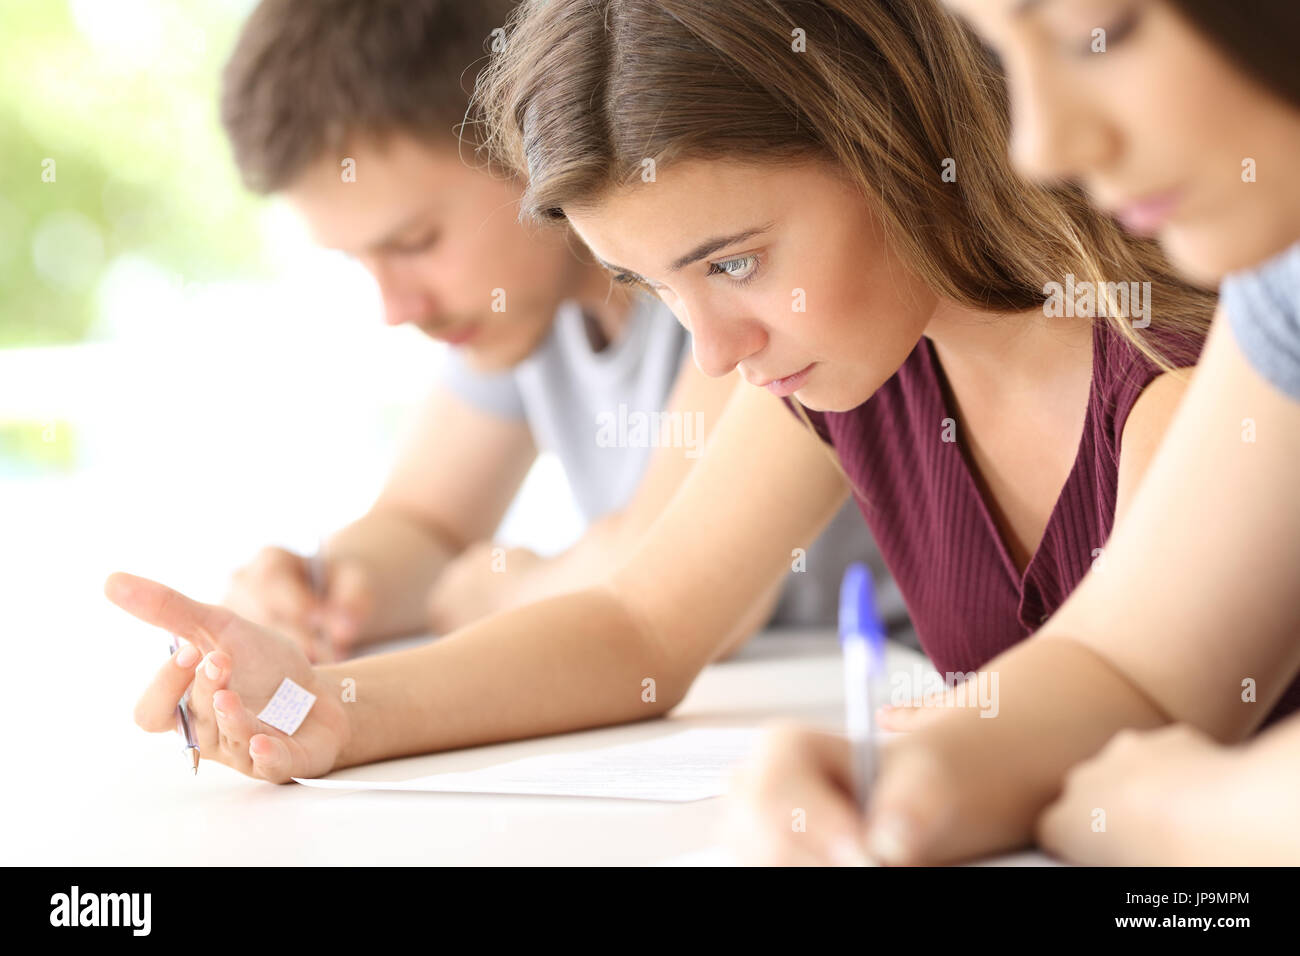 Bad student reading a cheating sheet during an exam in a classroom Stock Photo